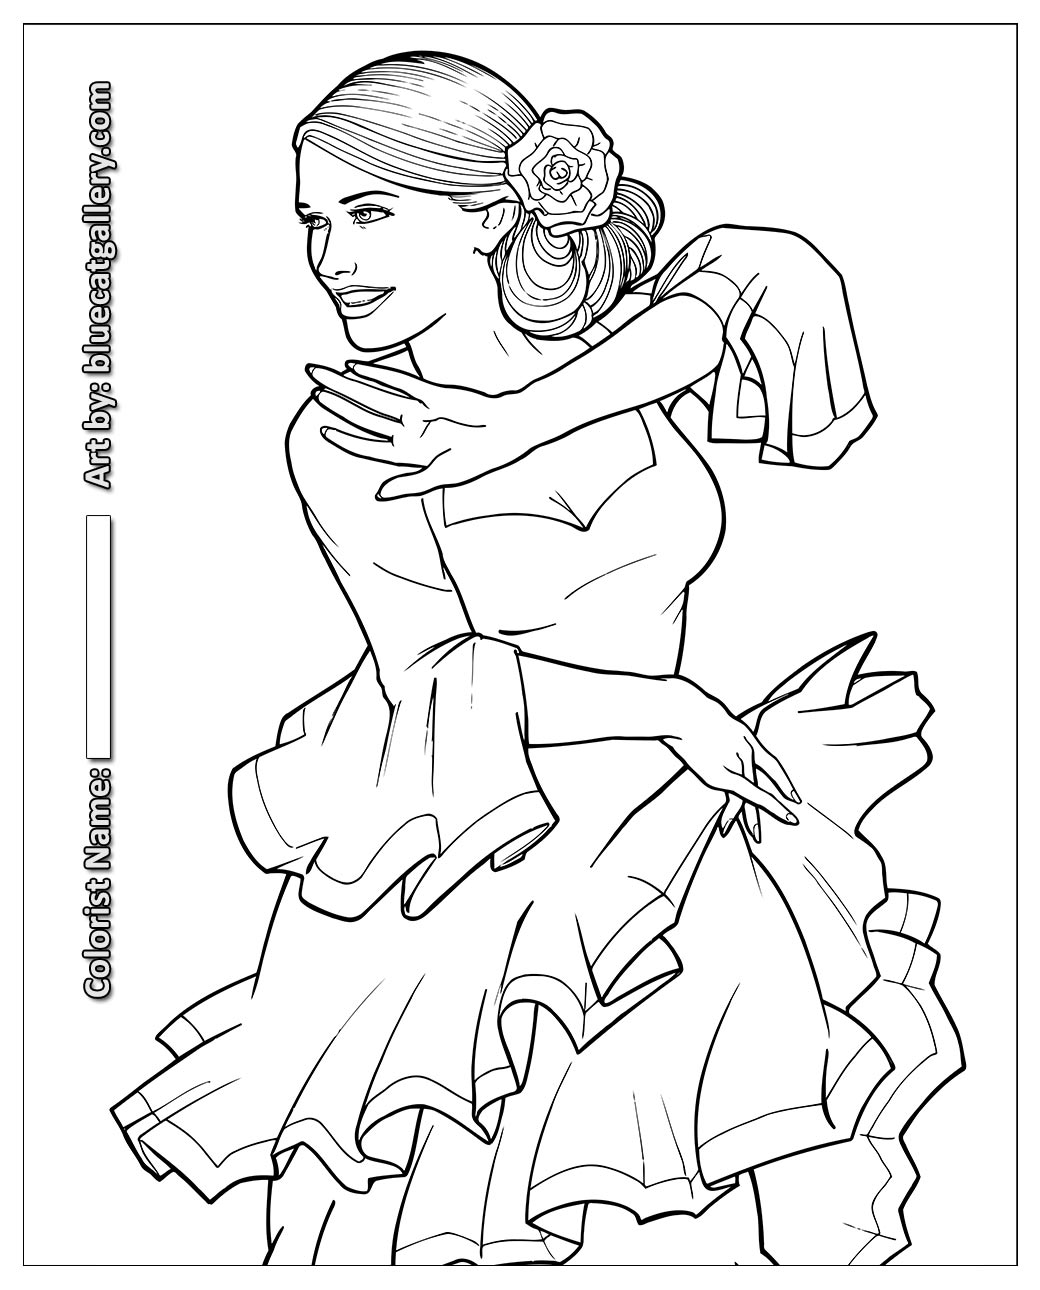 hamilton-coloring-pages-at-getcolorings-free-printable-colorings